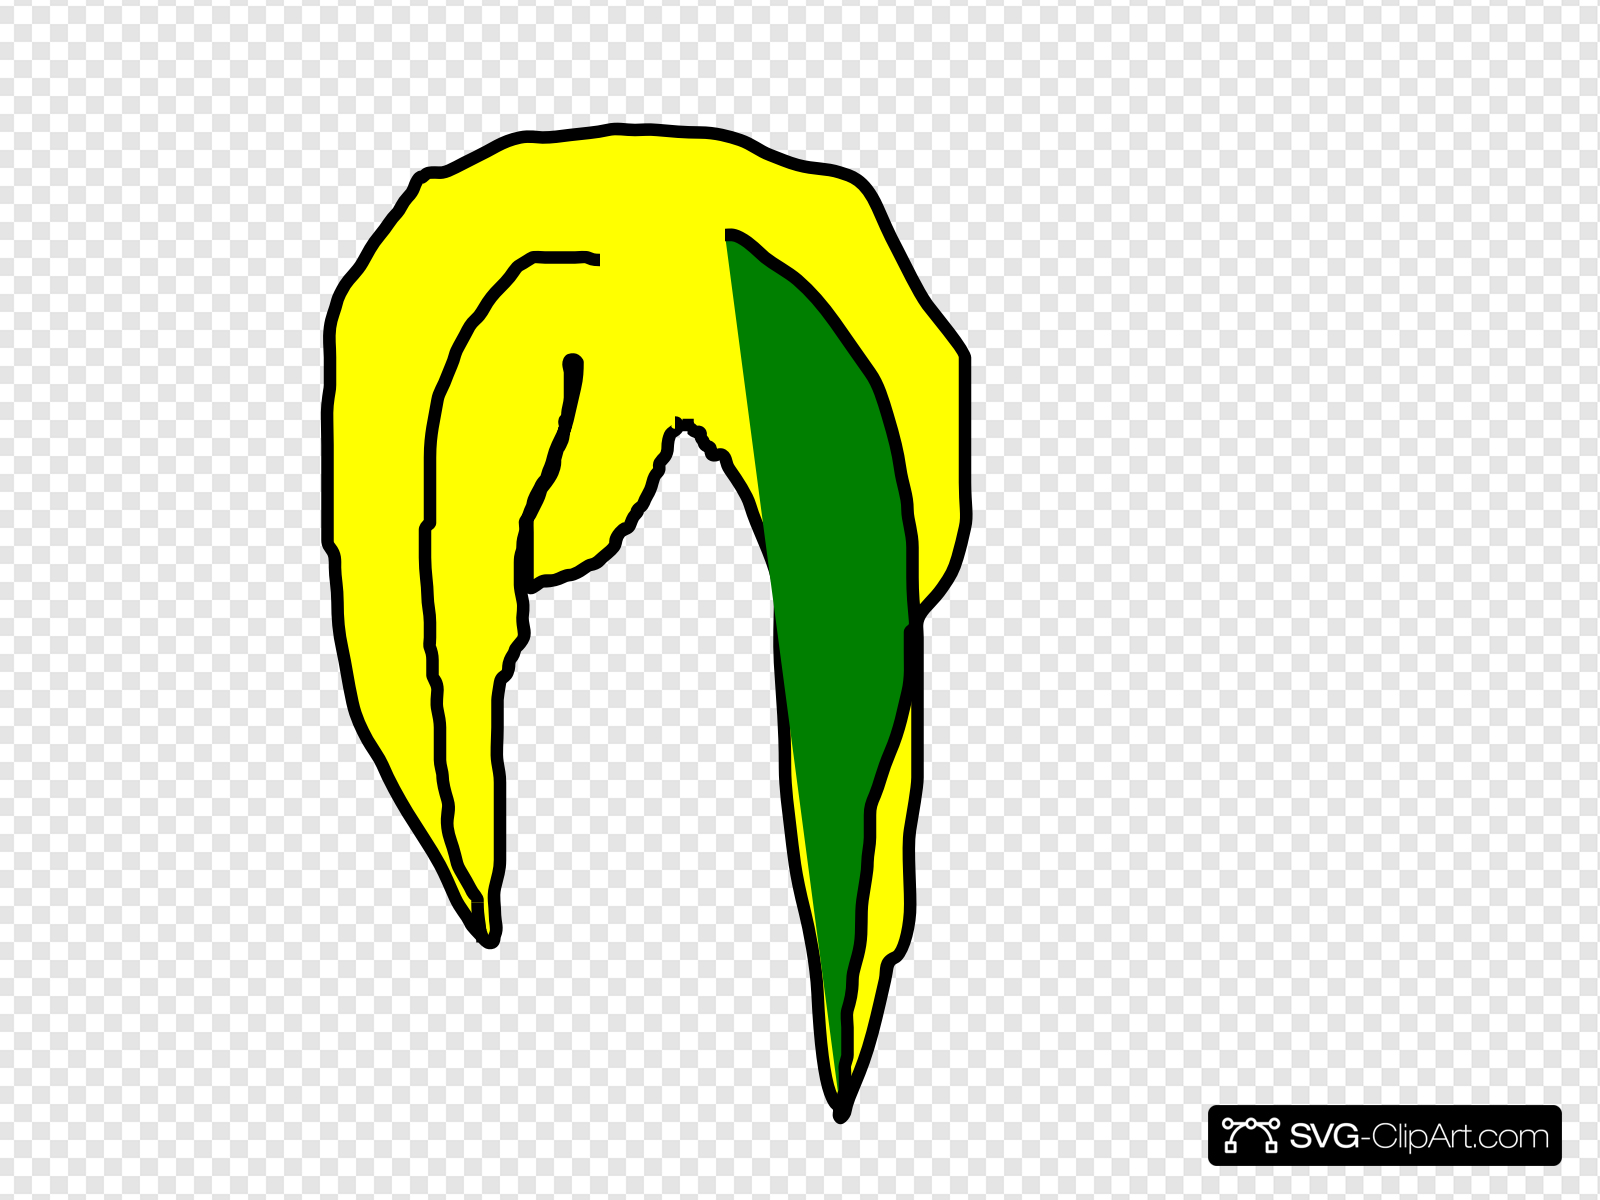 Emo Hair Clip art, Icon and SVG.